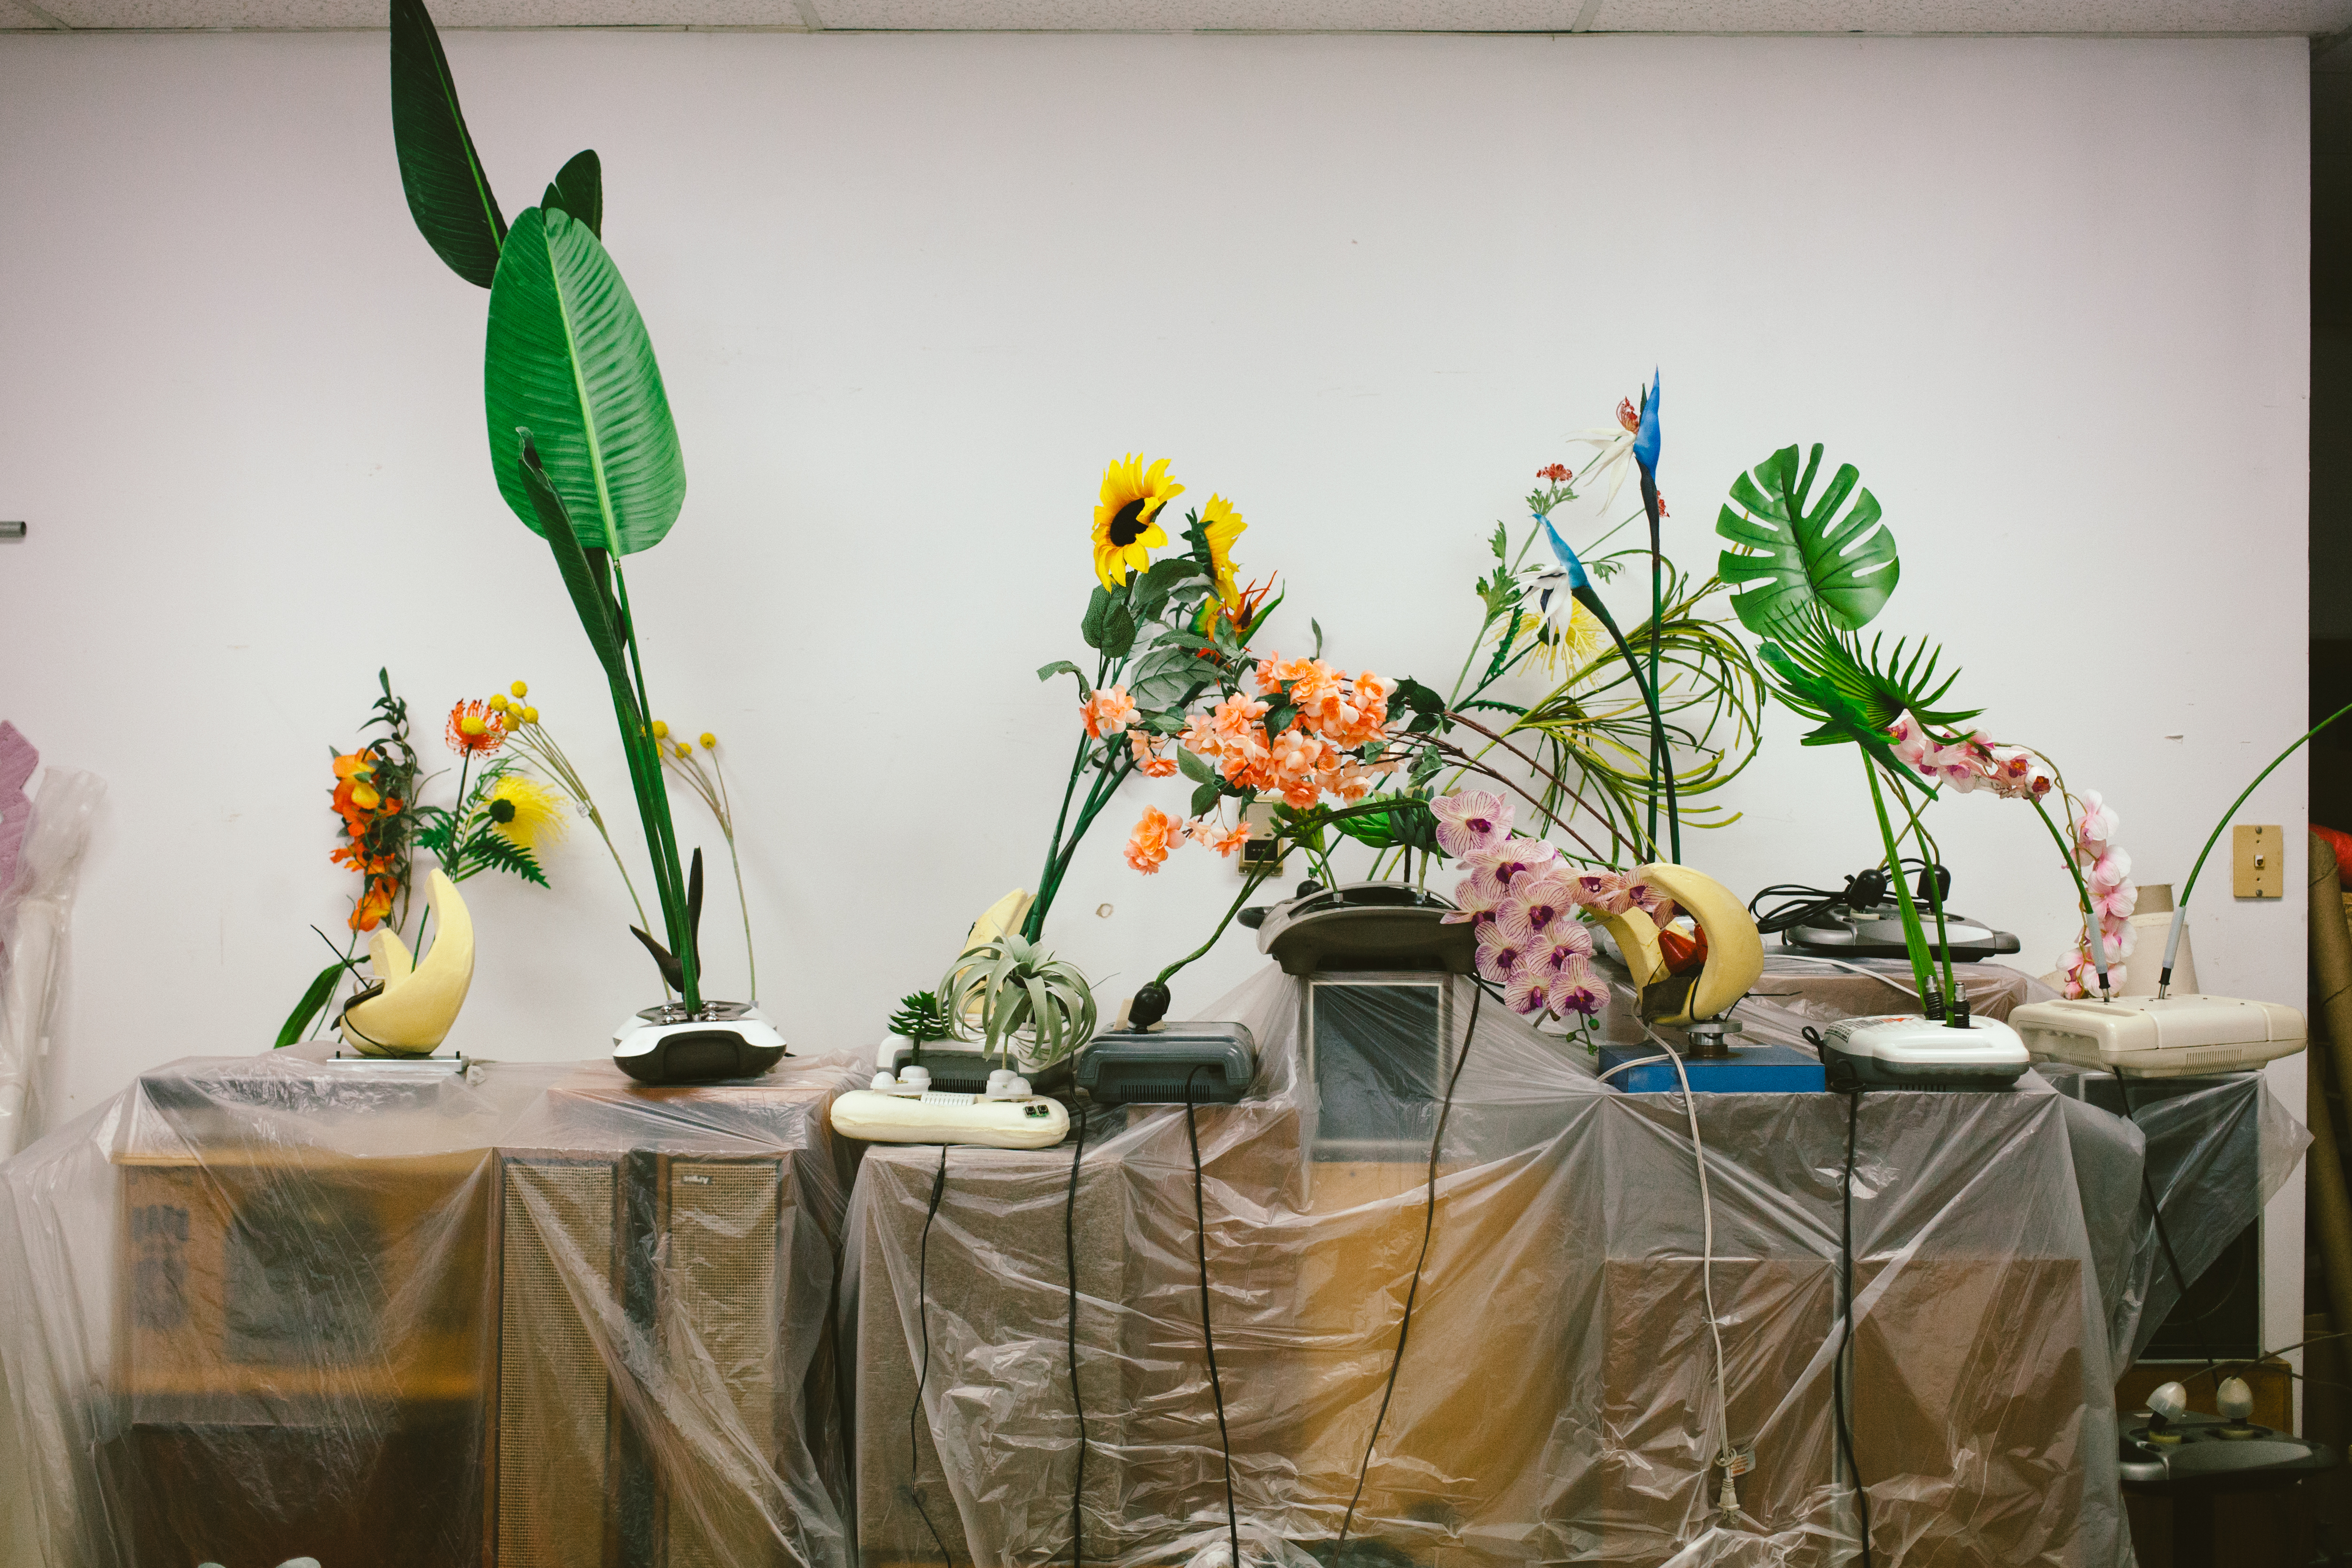 Rachel Youn, Untitled, 2020. Massagers, artificial plants, and speaker cabinets. Photo by Krista Valdez.